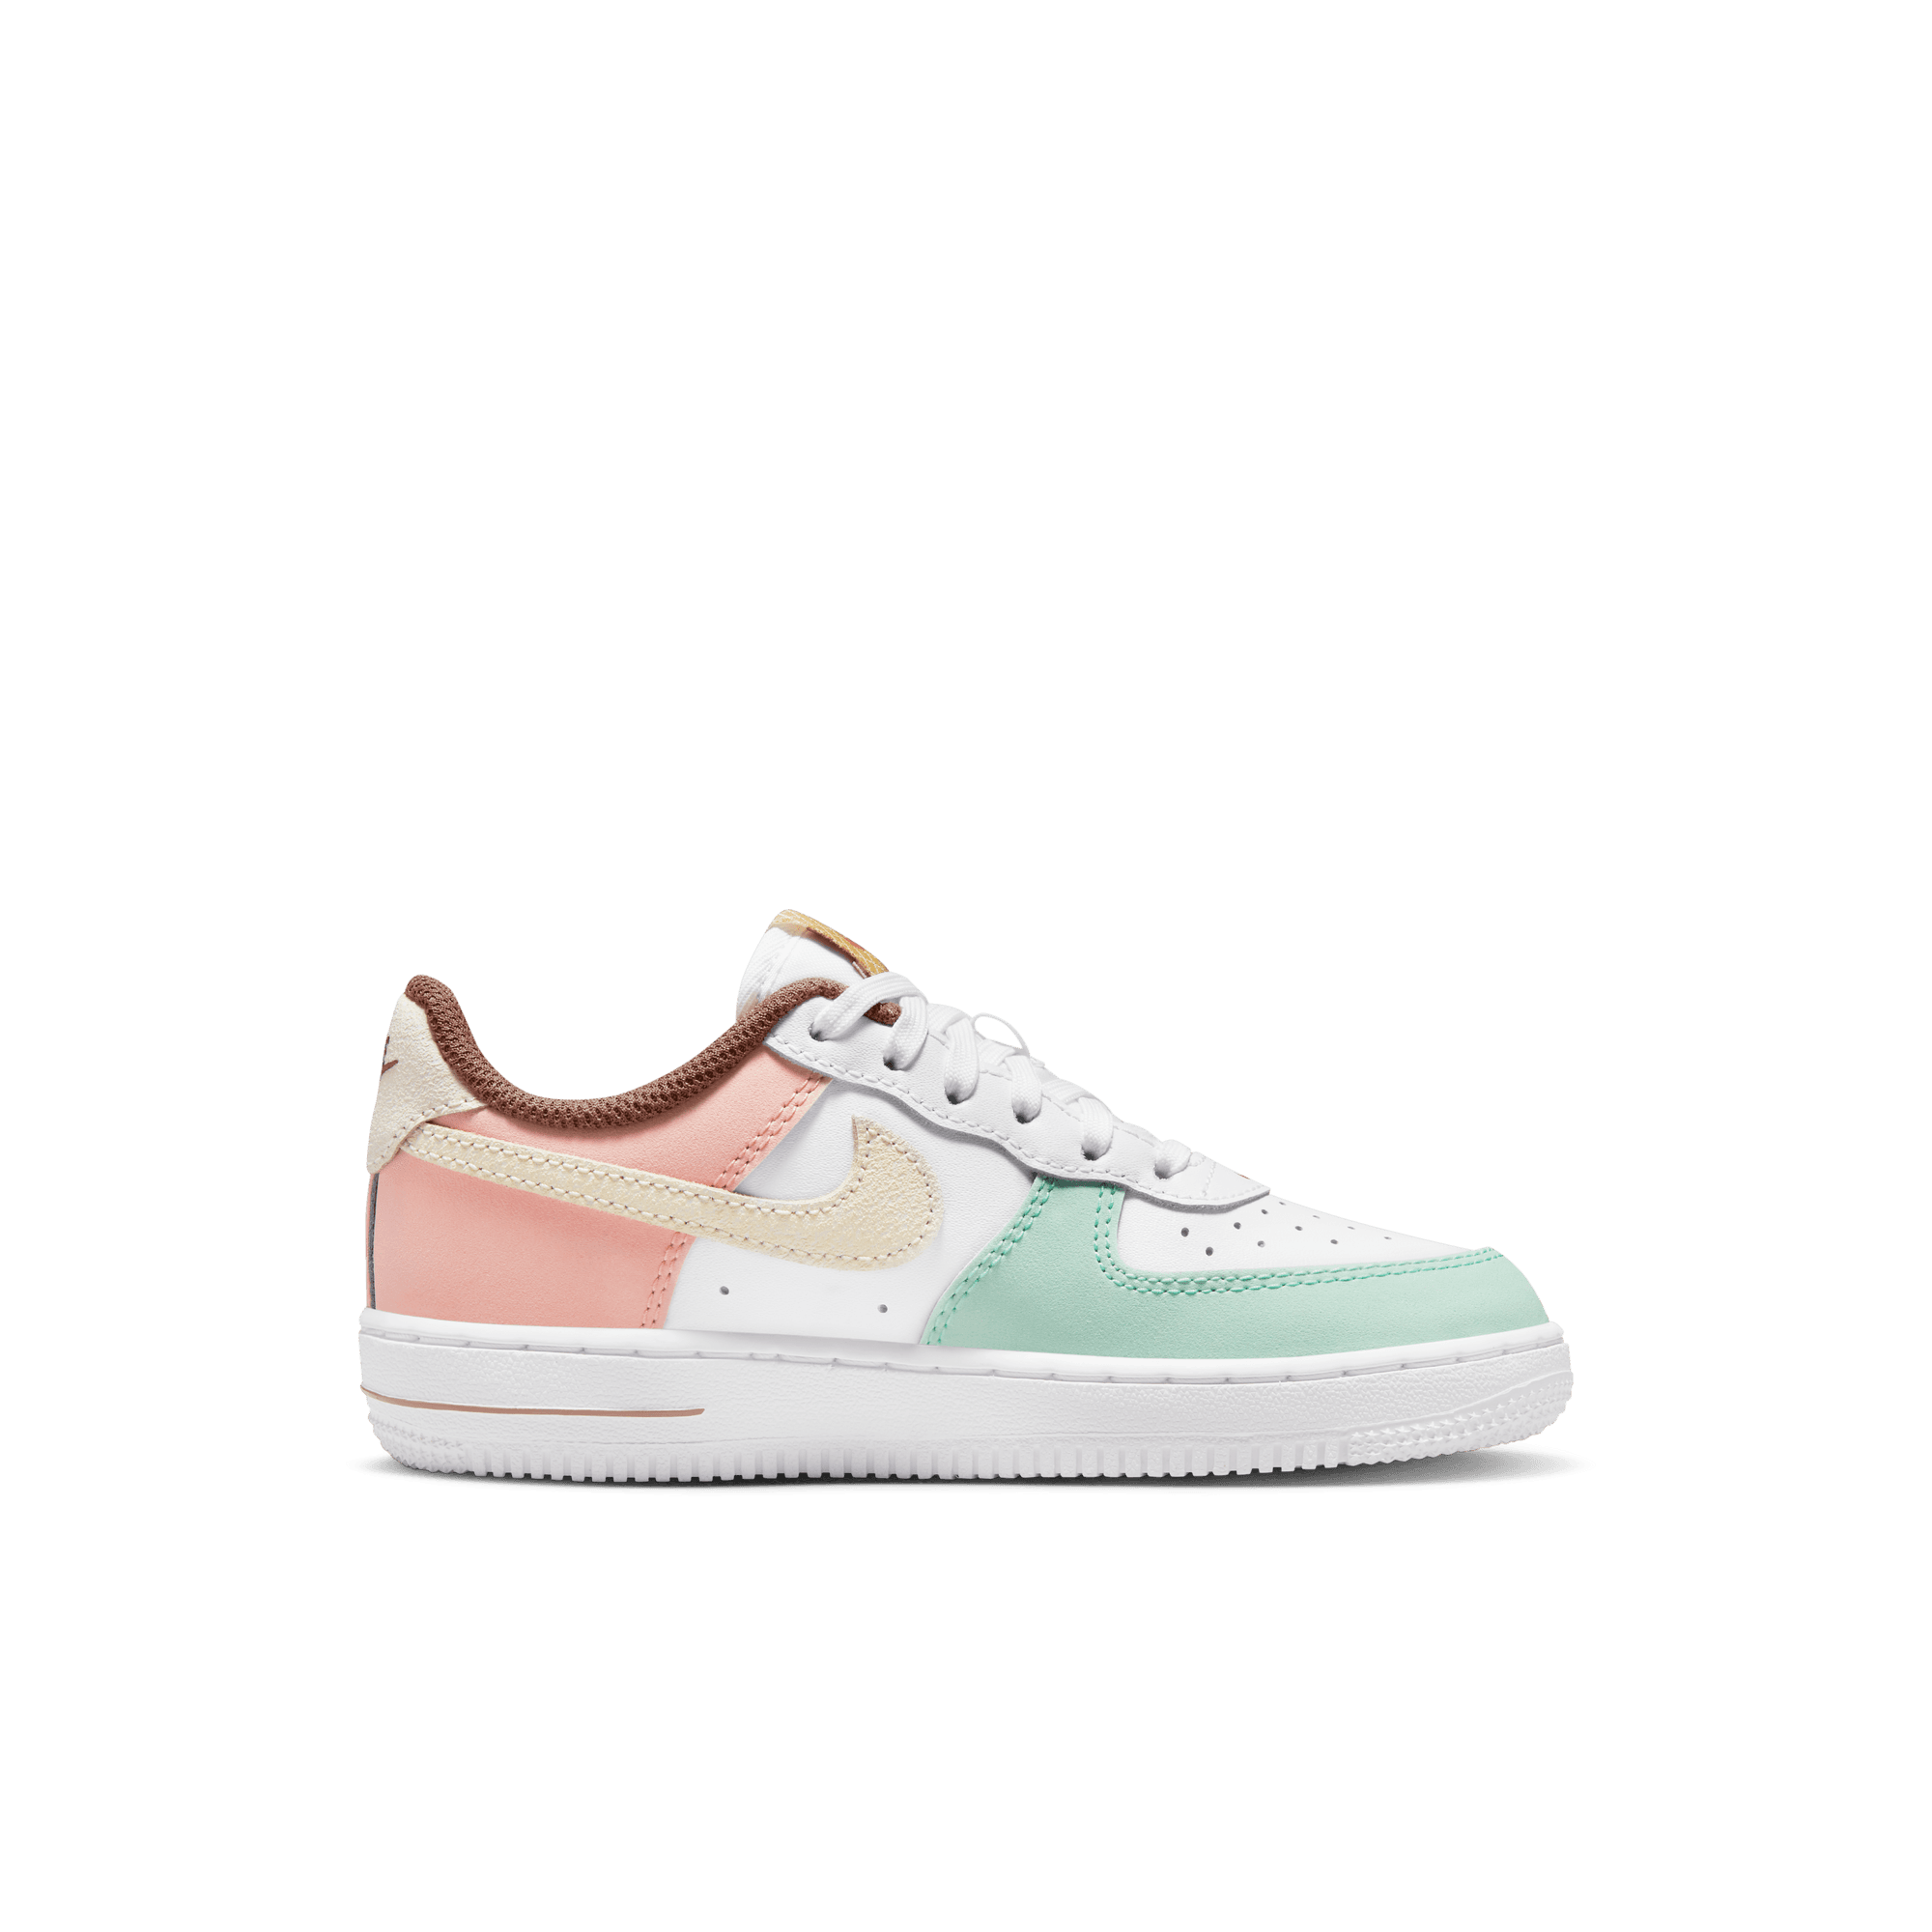 Nike Air Force 1 '07 LV8 Shoes -Men's - GBNY